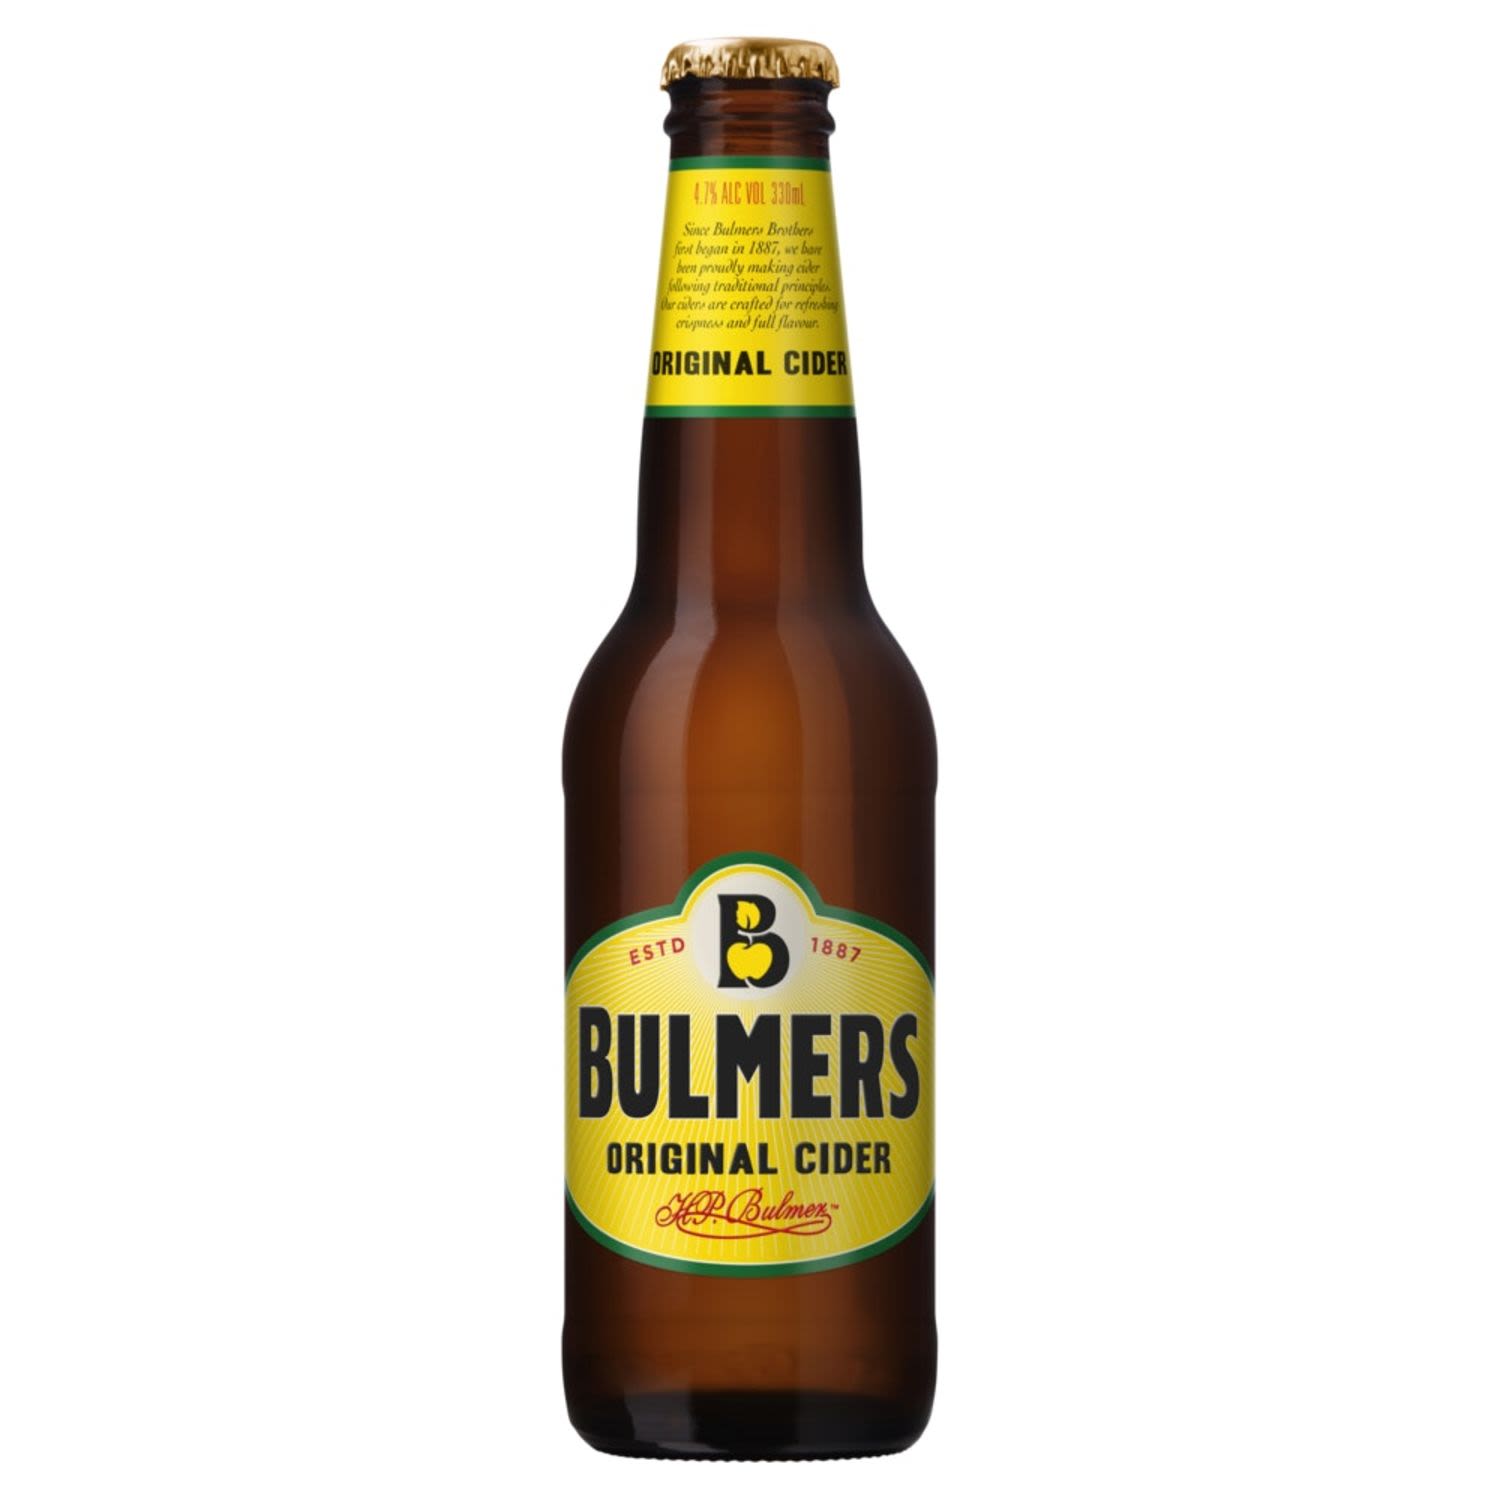 Bulmers Original Cider is quickly becoming a staple in most good pubs around the country. Bulmers is an authentic English-style apple Cider with a naturally refreshing taste and crisp character. A premium Cider for all occasions.<br /> <br />Alcohol Volume: 4.70%<br /><br />Pack Format: 4 Pack<br /><br />Standard Drinks: 1.2</br /><br />Pack Type: Bottle<br /><br />Country of Origin: Australia<br />